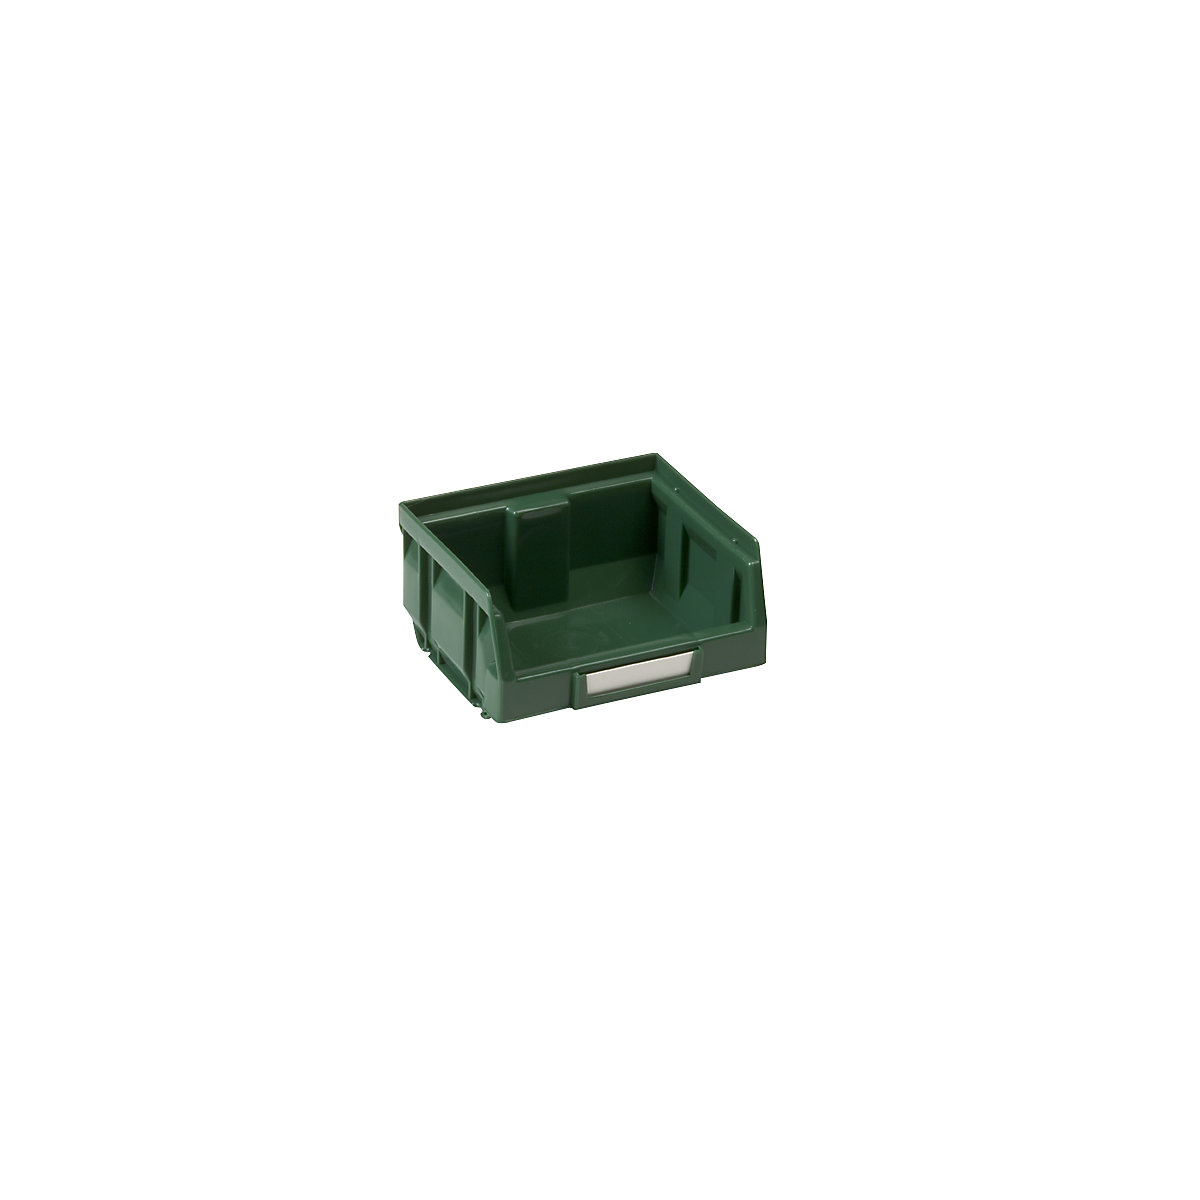 Open fronted storage bin made of polyethylene, LxWxH 88 x 105 x 54 mm, green, pack of 50-10